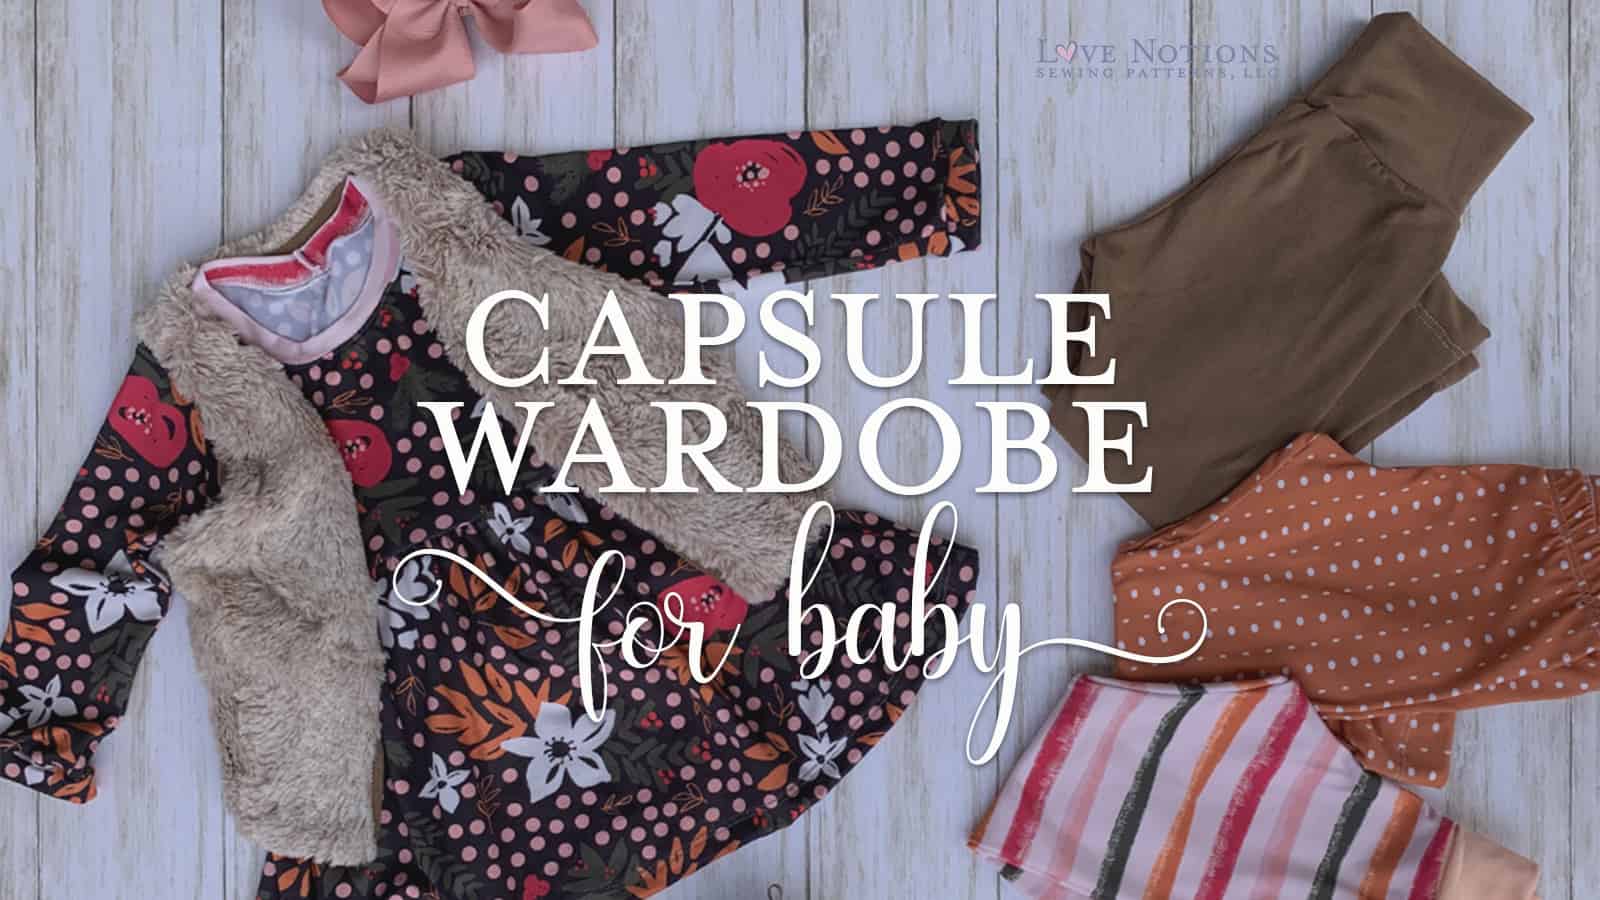 7 Patterns for a Fool-Proof Baby Capsule Wardrobe - Love Notions Sewing  Patterns